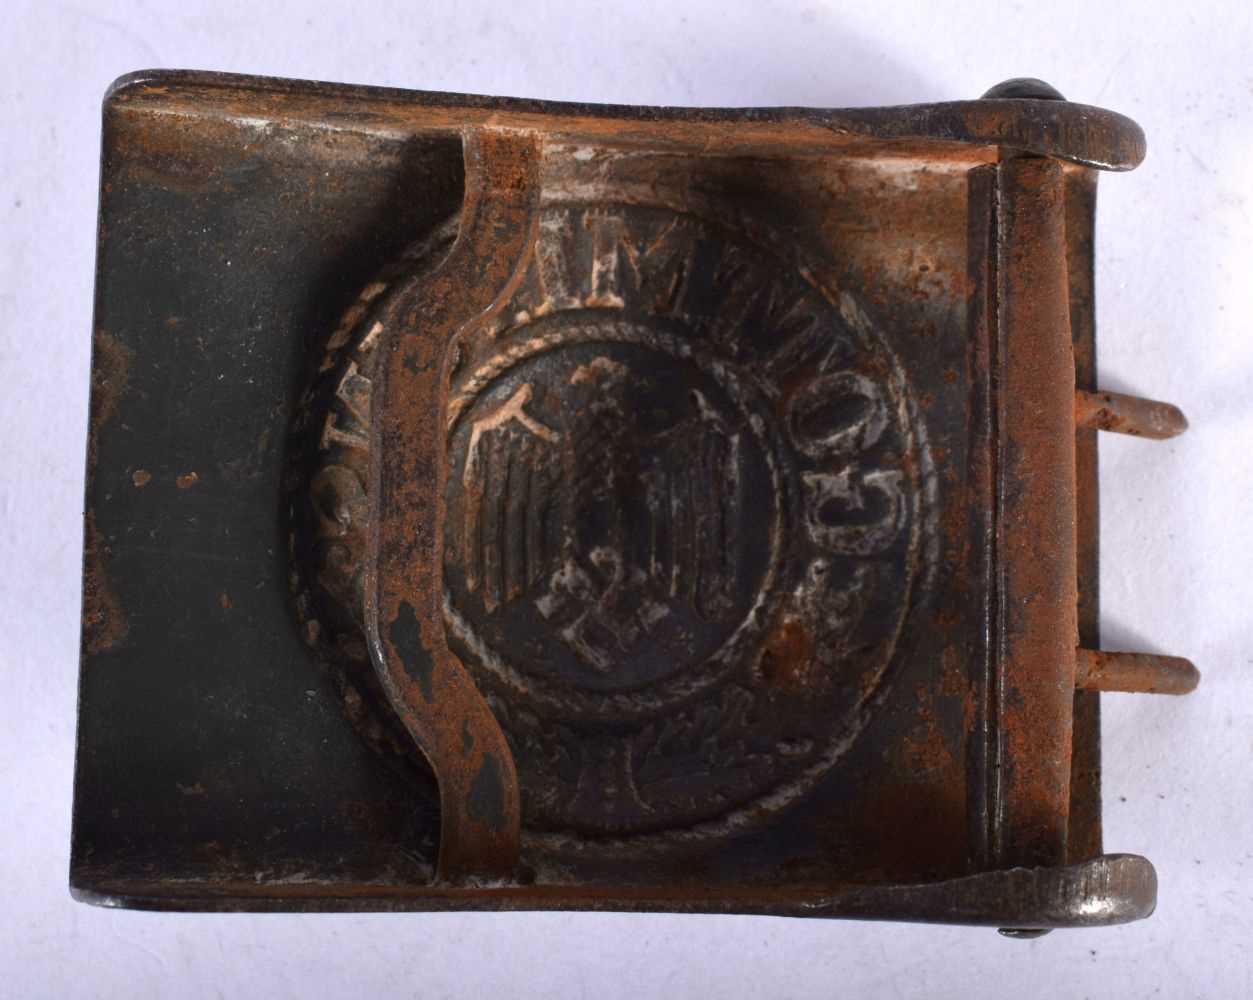 German WWI leather belt and buckle with the Prussian motto - Gott Mit Uns. Belt 94 cm x 4cm. Wear - Image 3 of 4